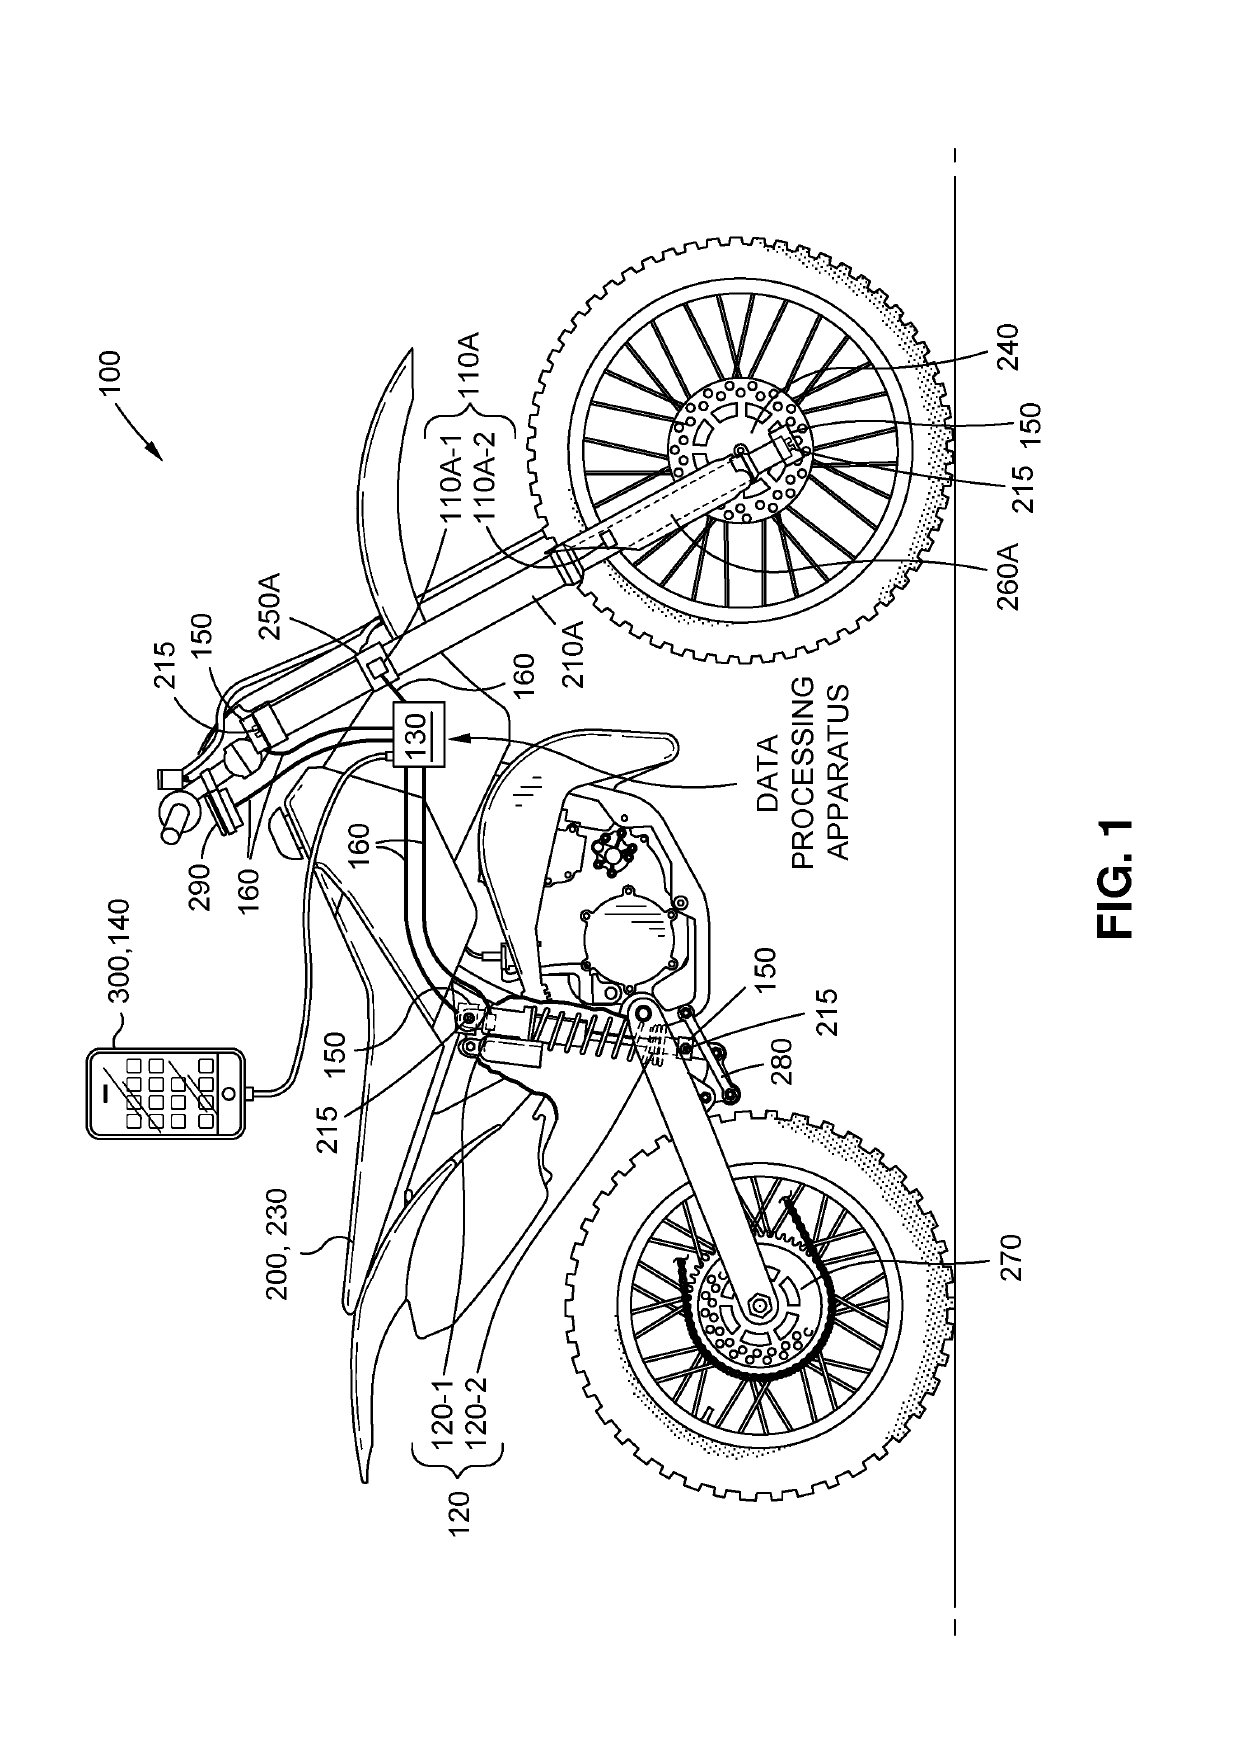 Off-road vehicle suspension monitoring and adjustment system